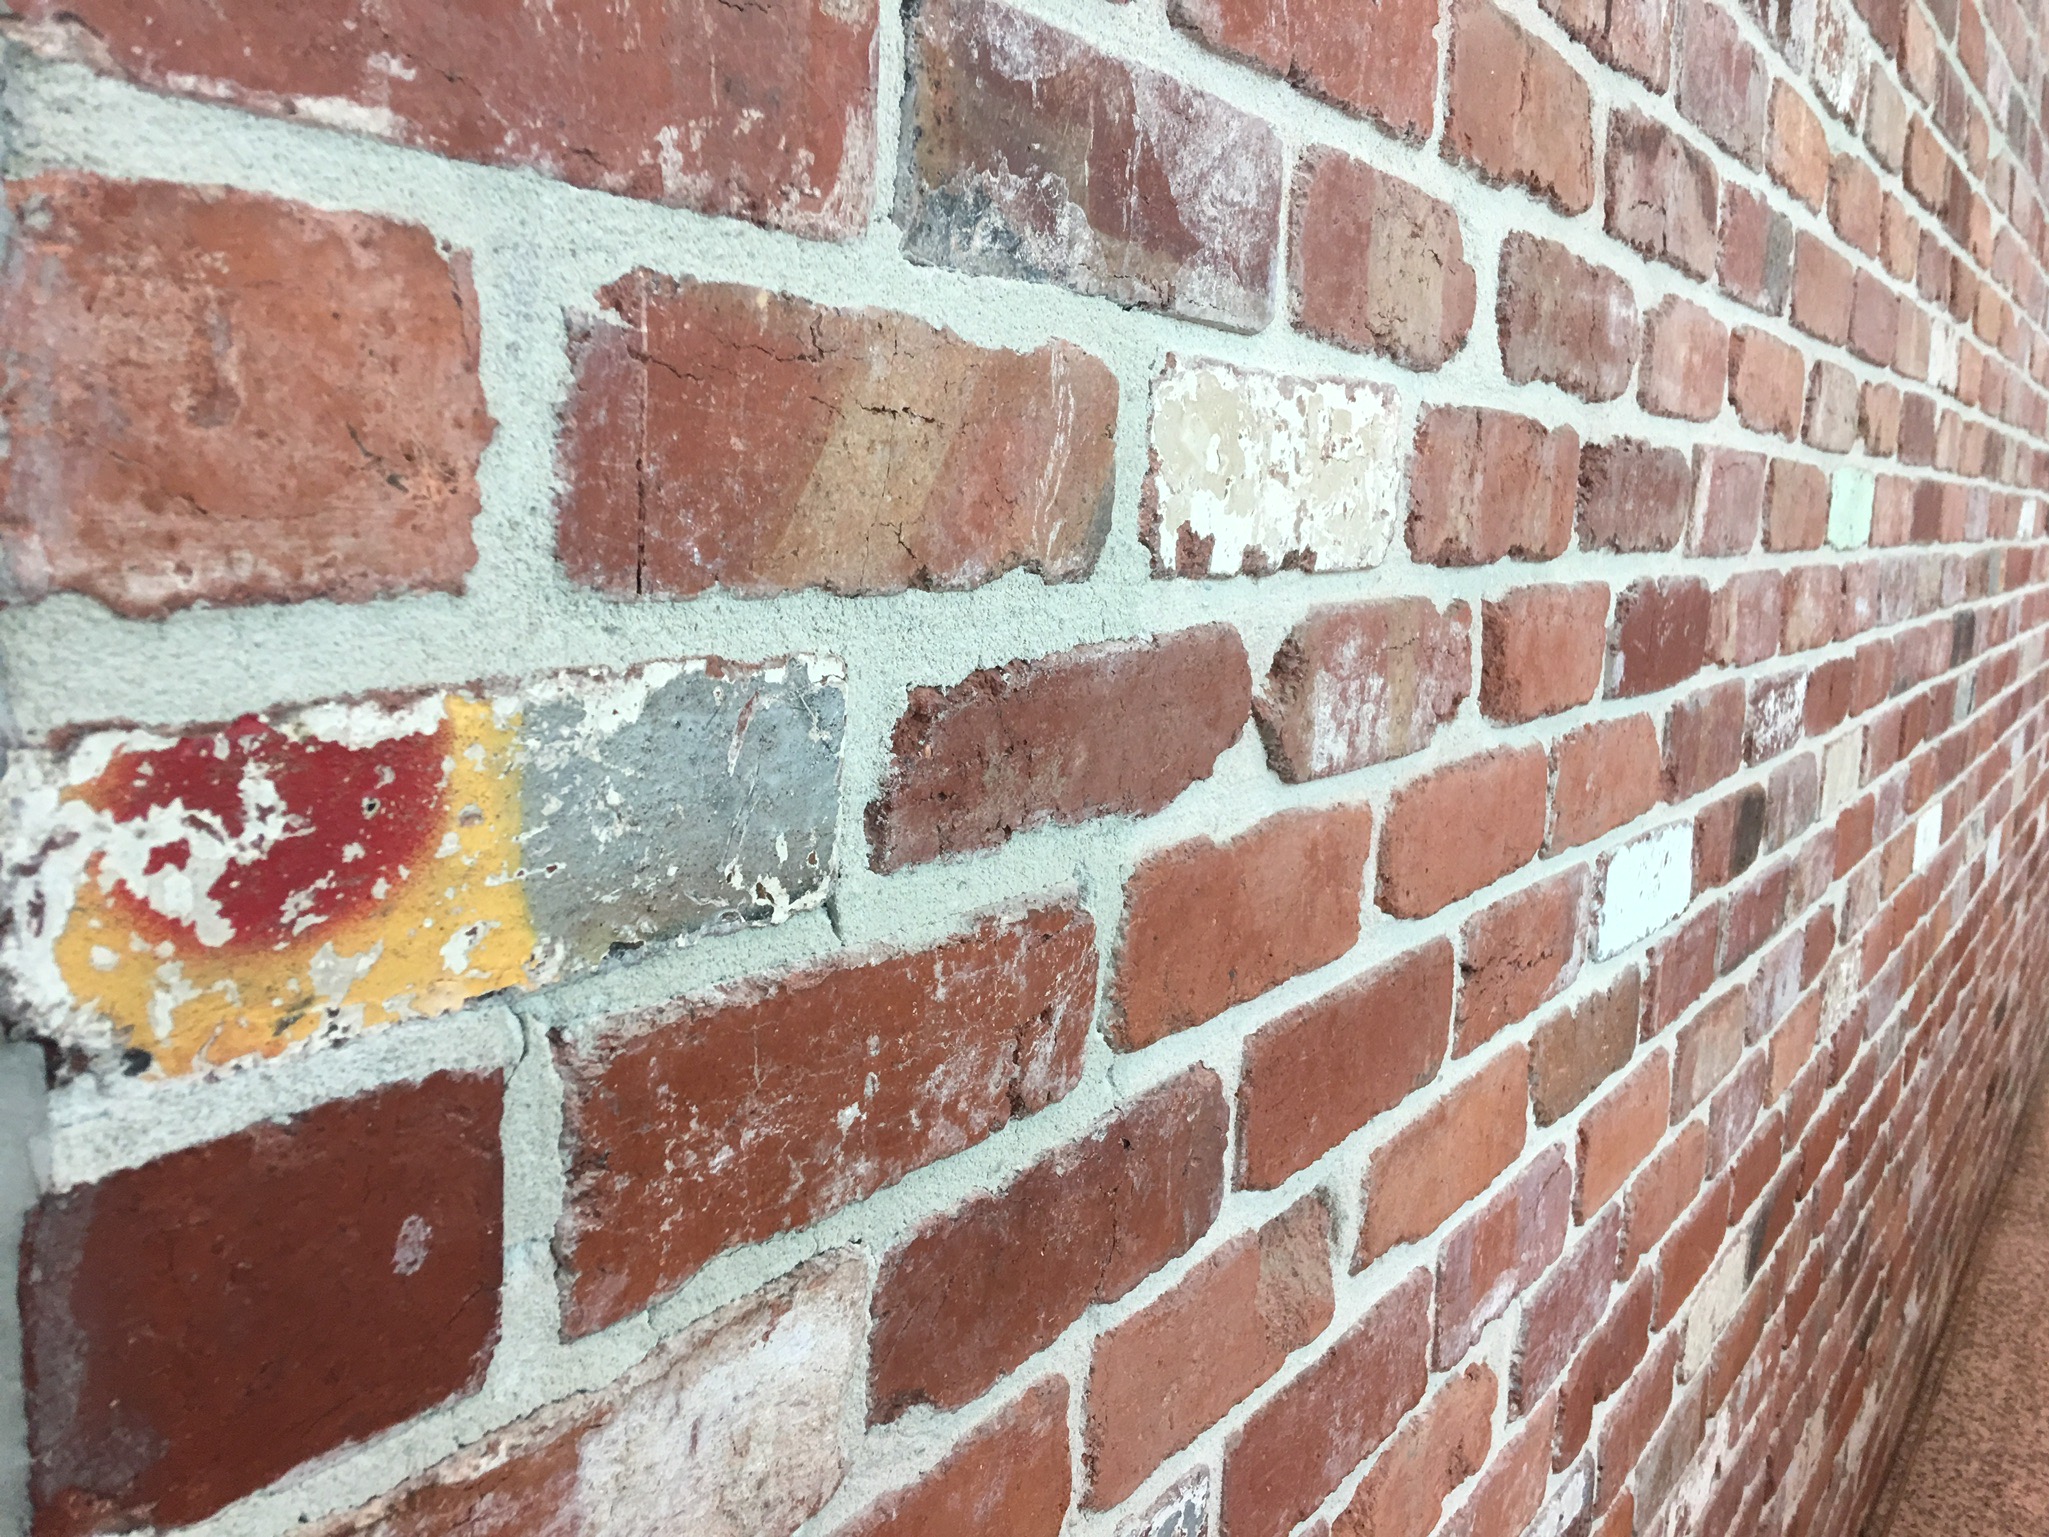 A wall built with reclaimed bricks - an example of a recycled building material.